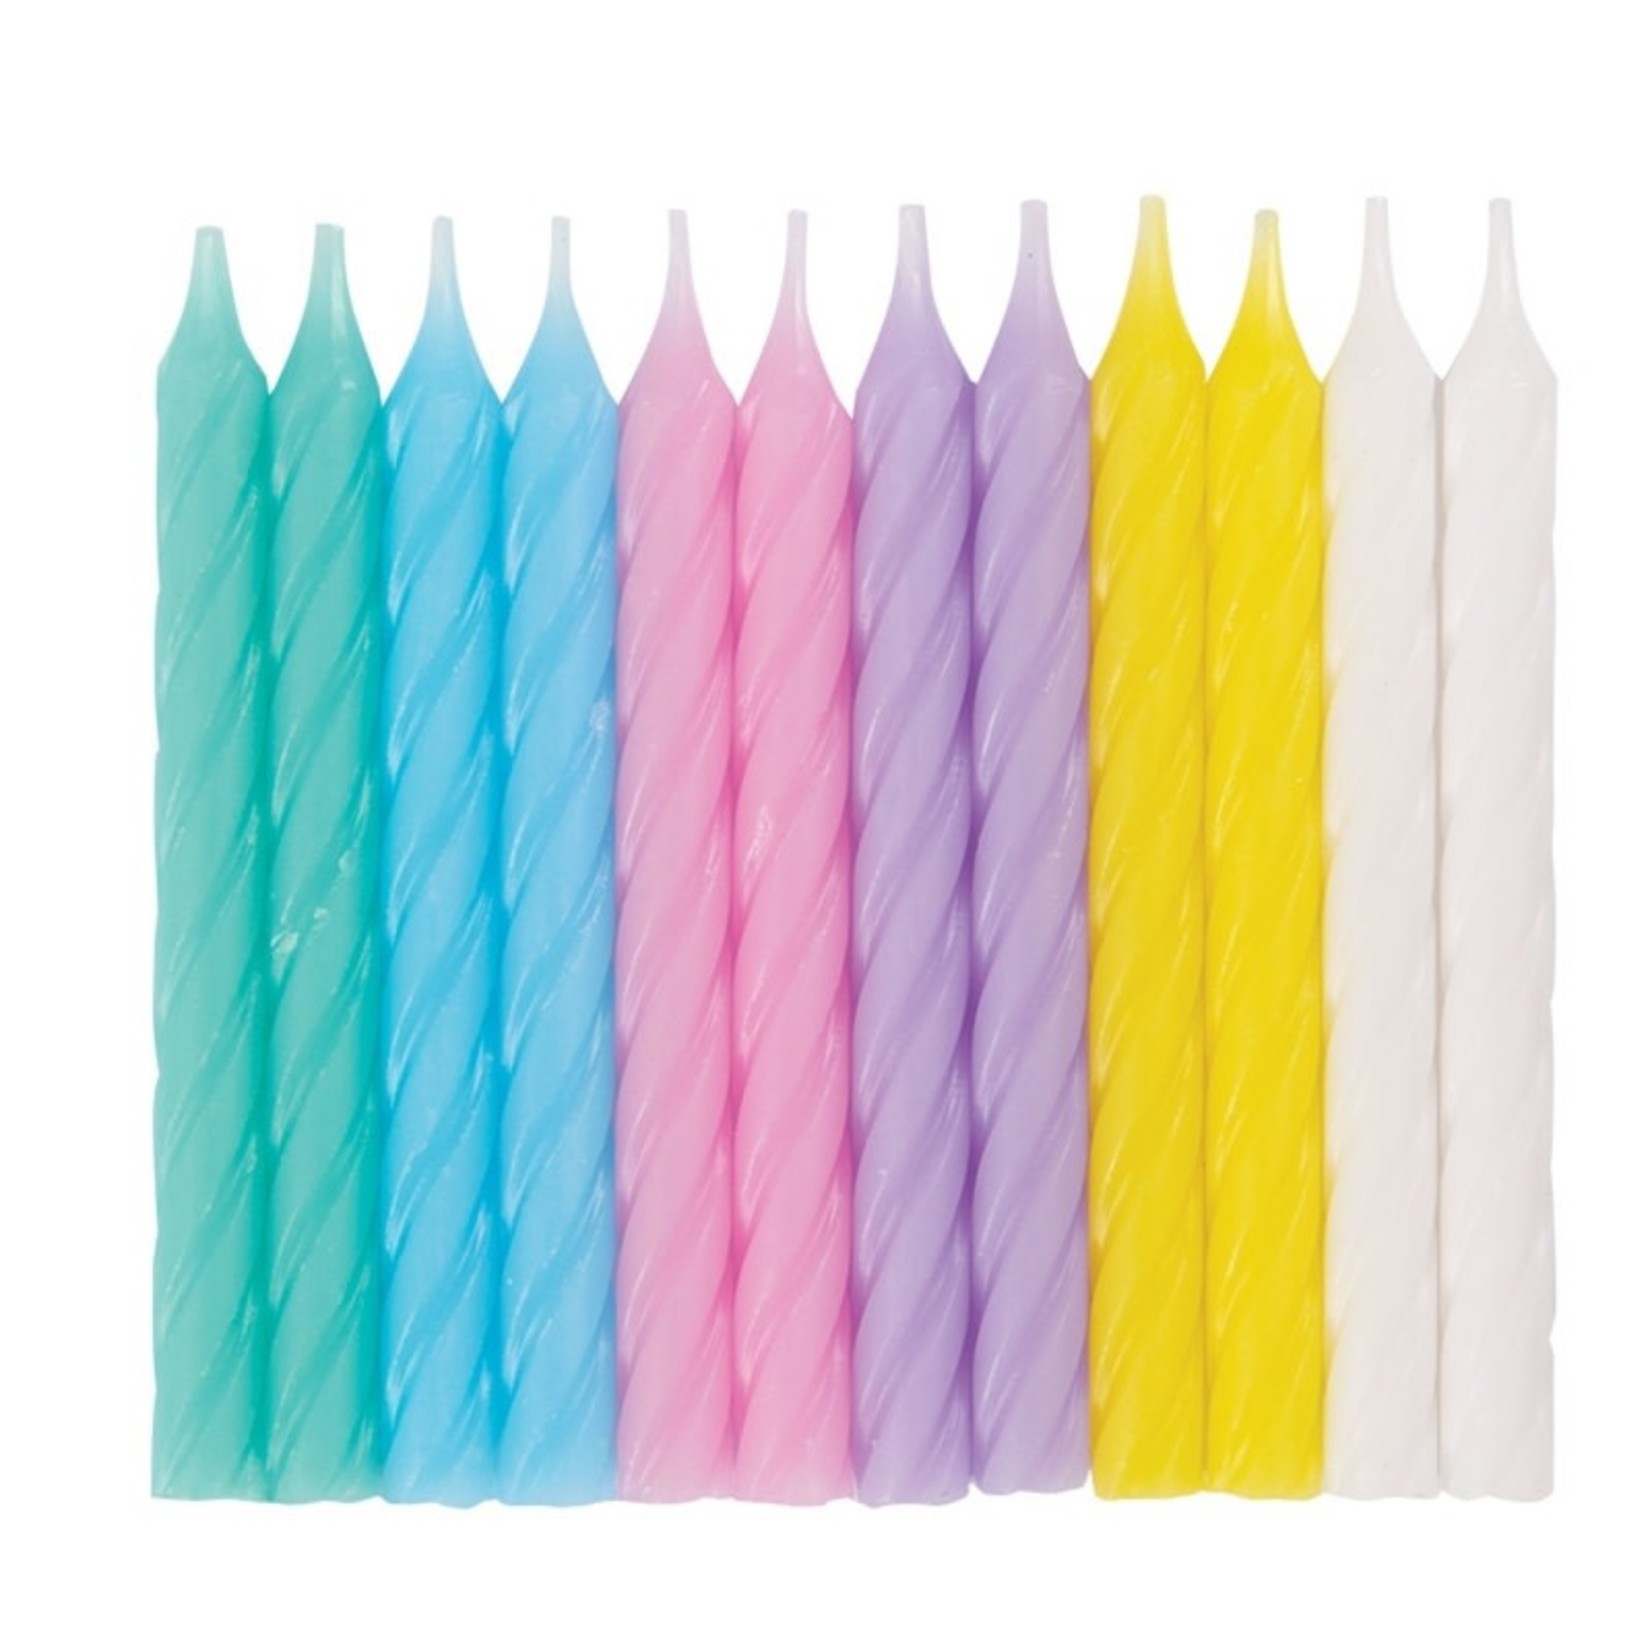 Pastel Candles 24ct